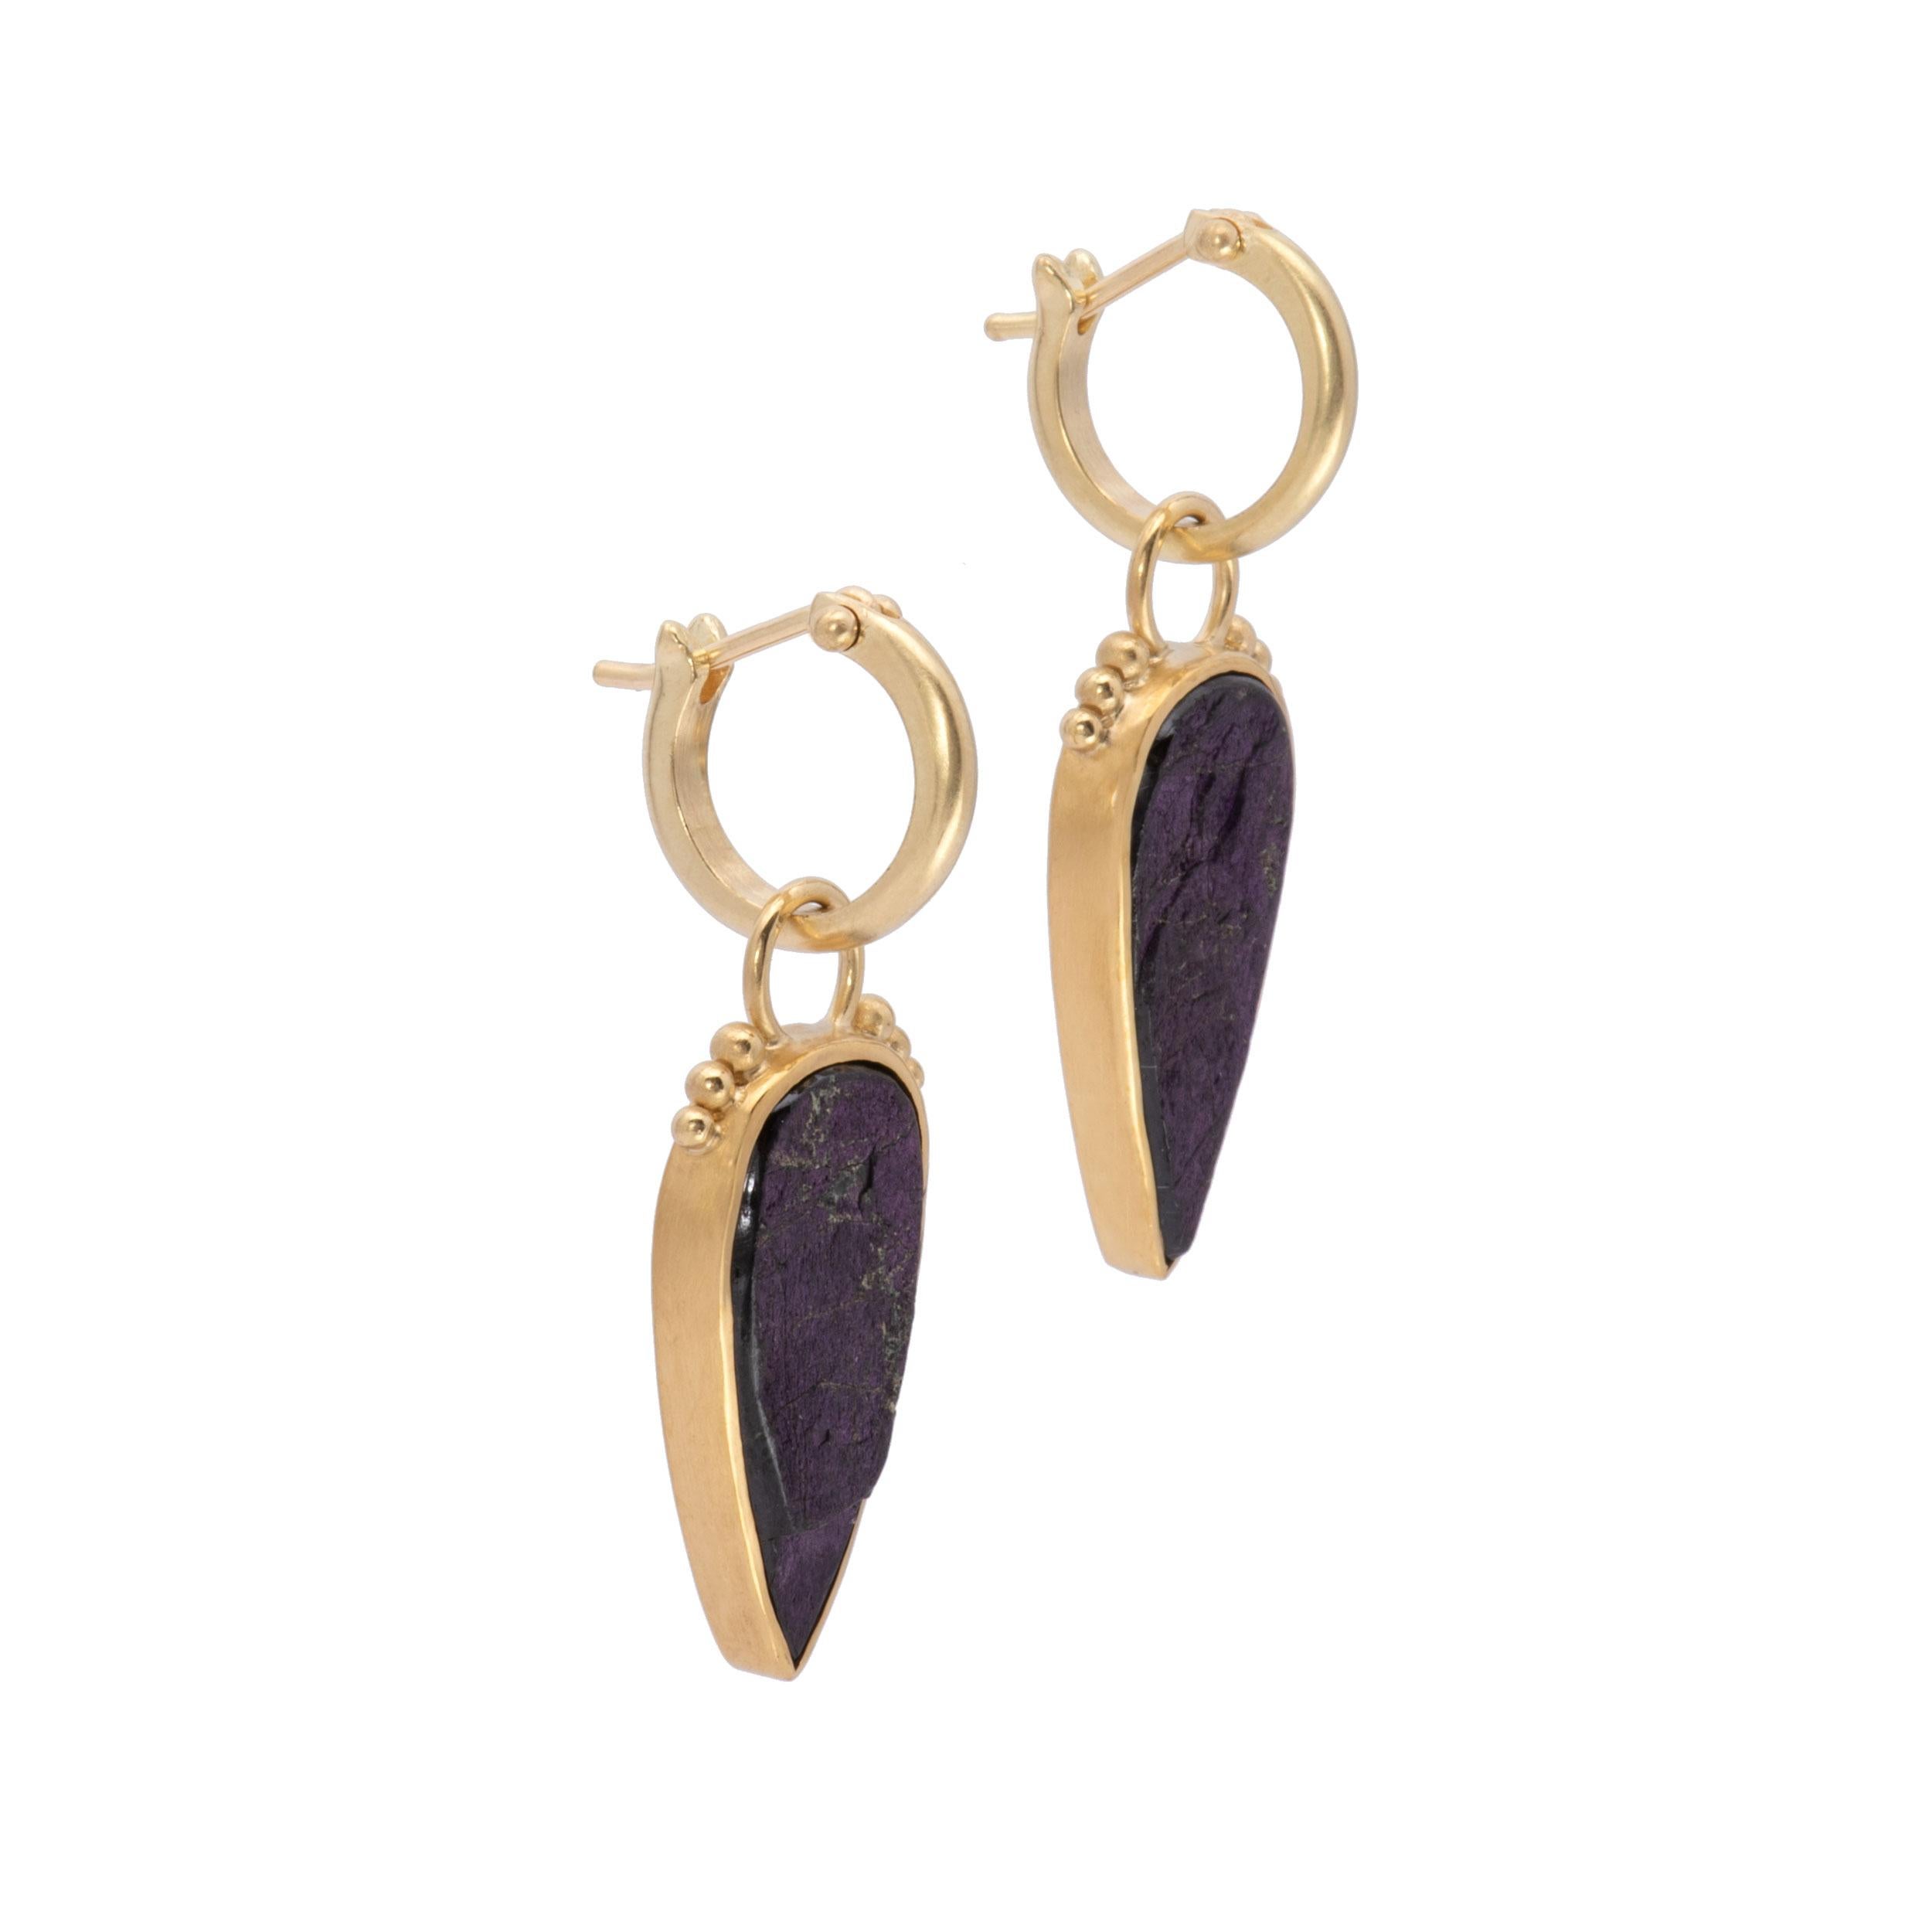 Iridescent Purpurite Teardrop Earrings are framed in 22k and 18k gold and hang from small plain hoops which click tightly shut for security. Satiny pinkish purple tones shine like dragonfly wings in sunlight in these teardrop earrings which are set